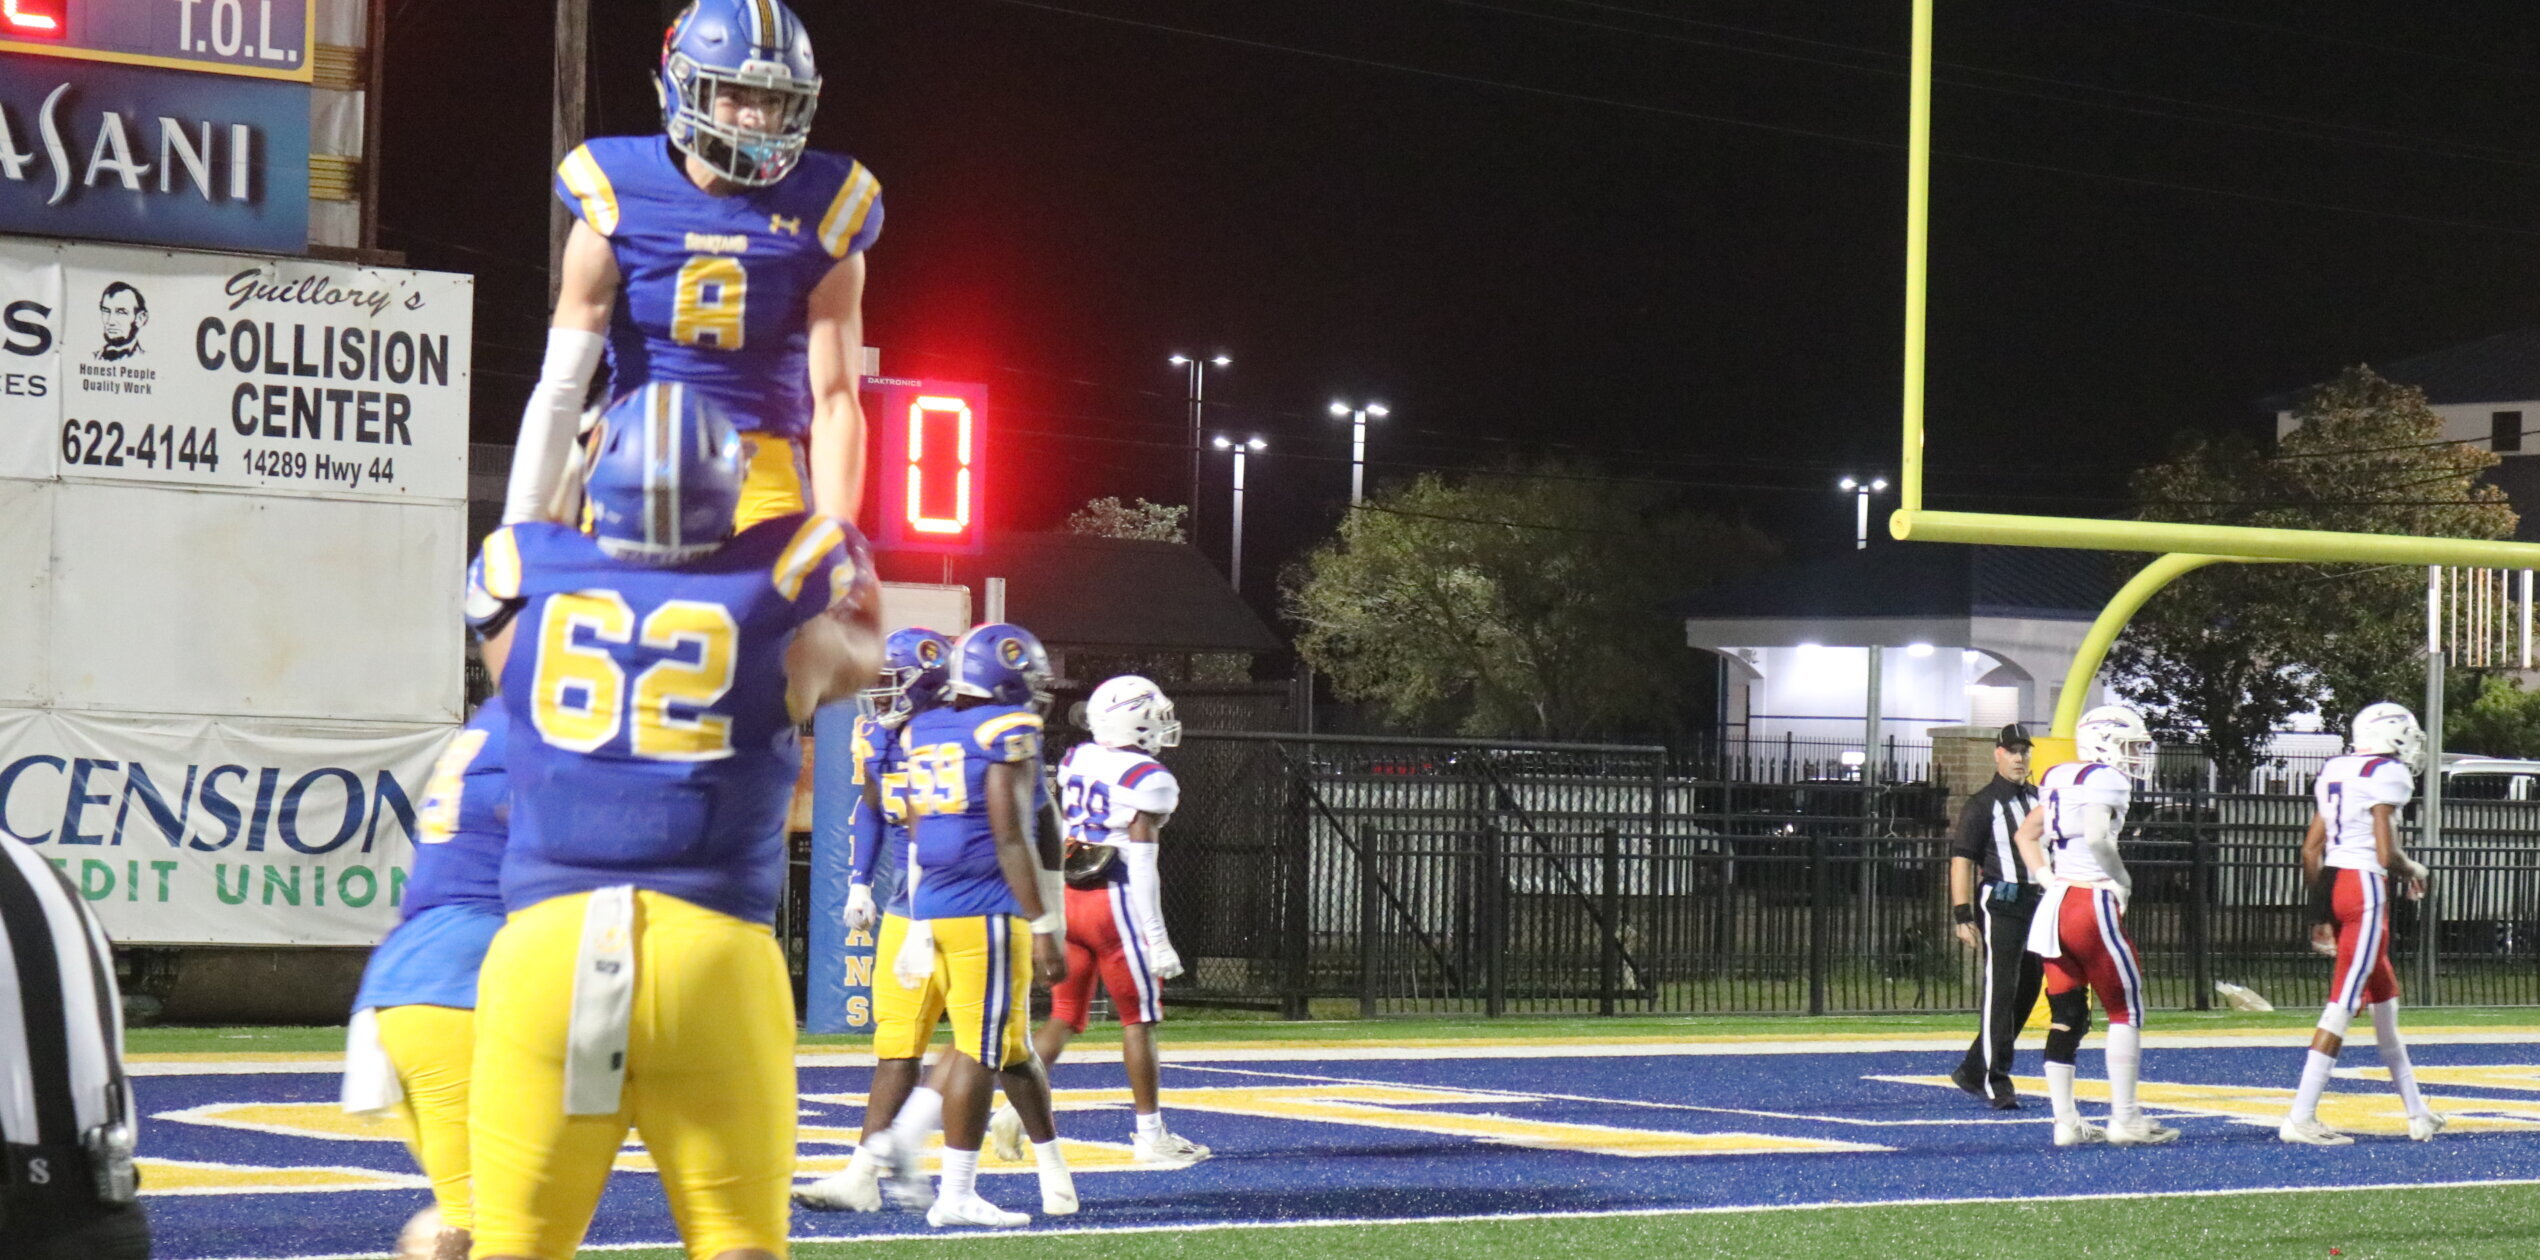 East Ascension Shuts Out West Ouachita 37-0 and Advances in Second Round To Play Neville